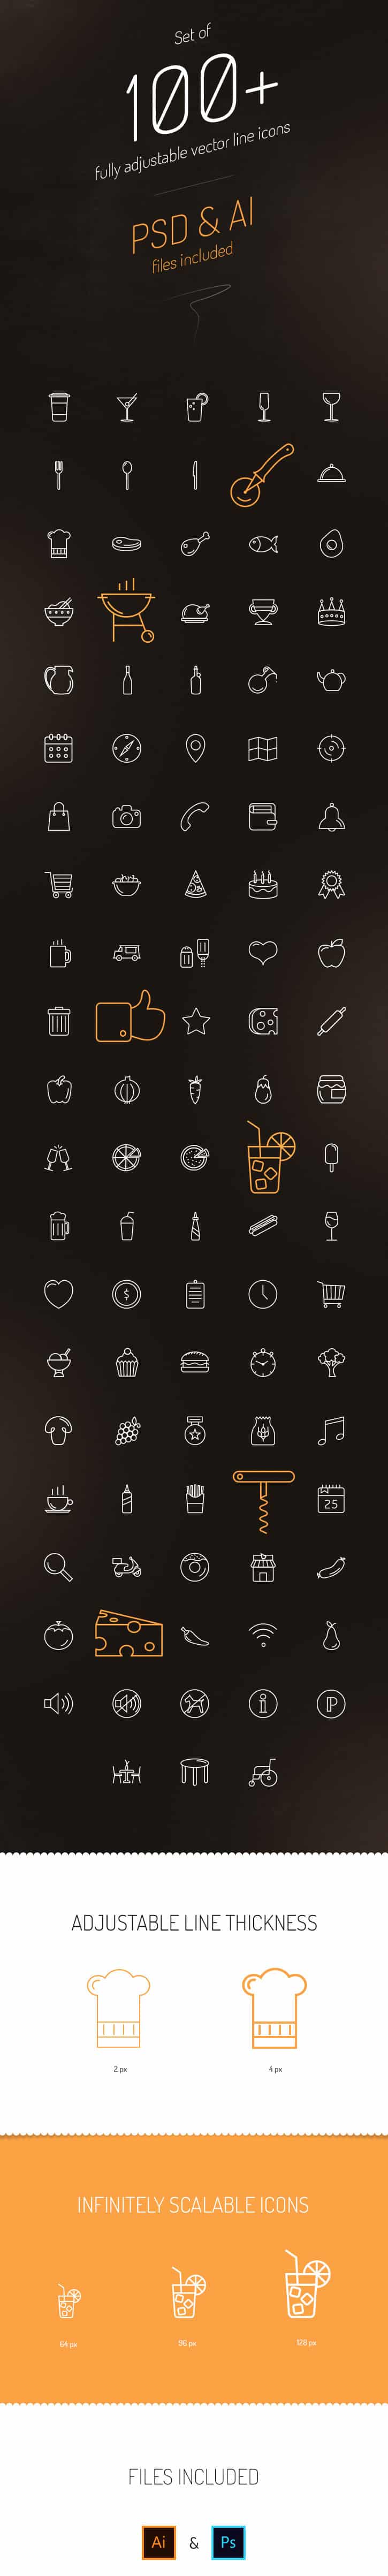 100-free-line-vector-icons